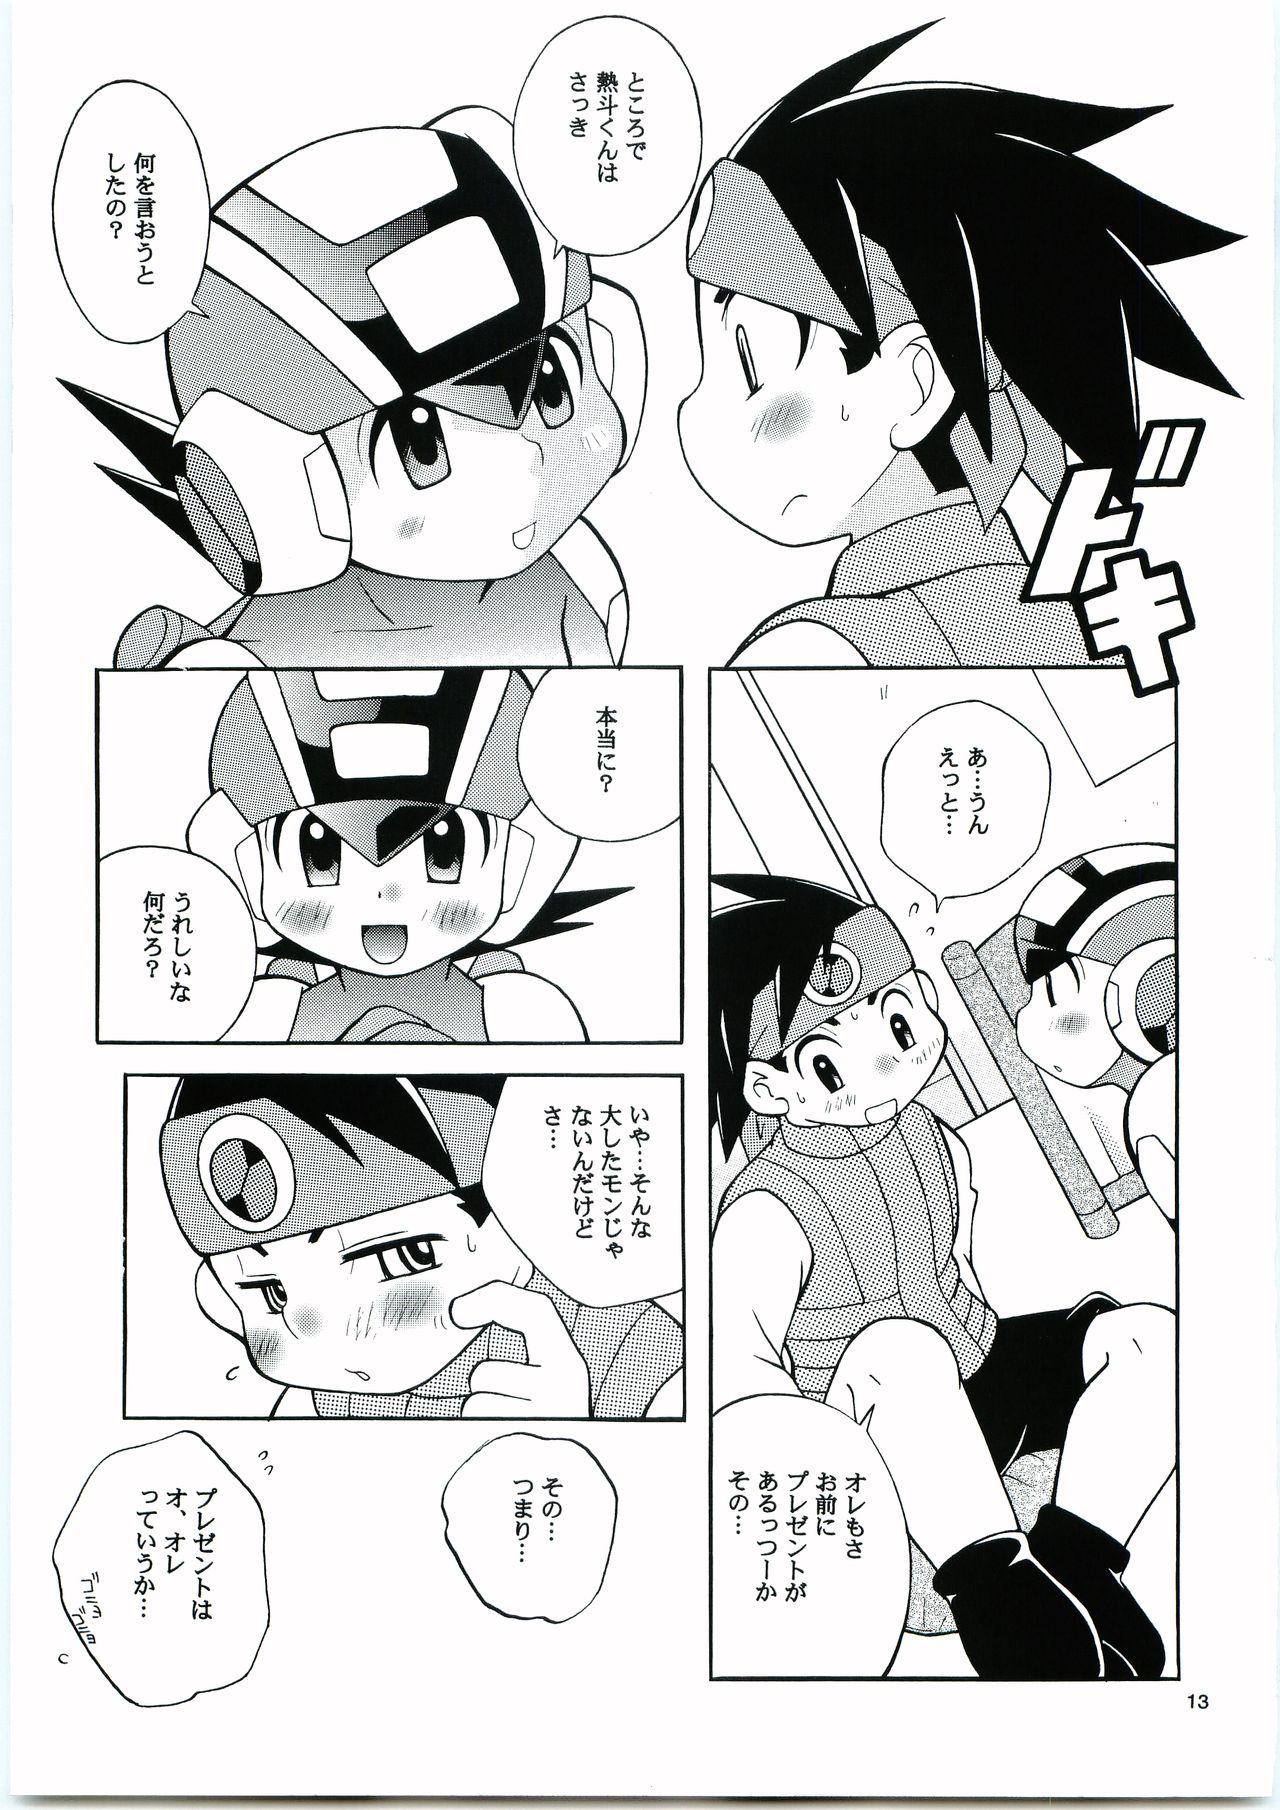 Group Buon Compleanno! - Megaman battle network Topless - Page 12